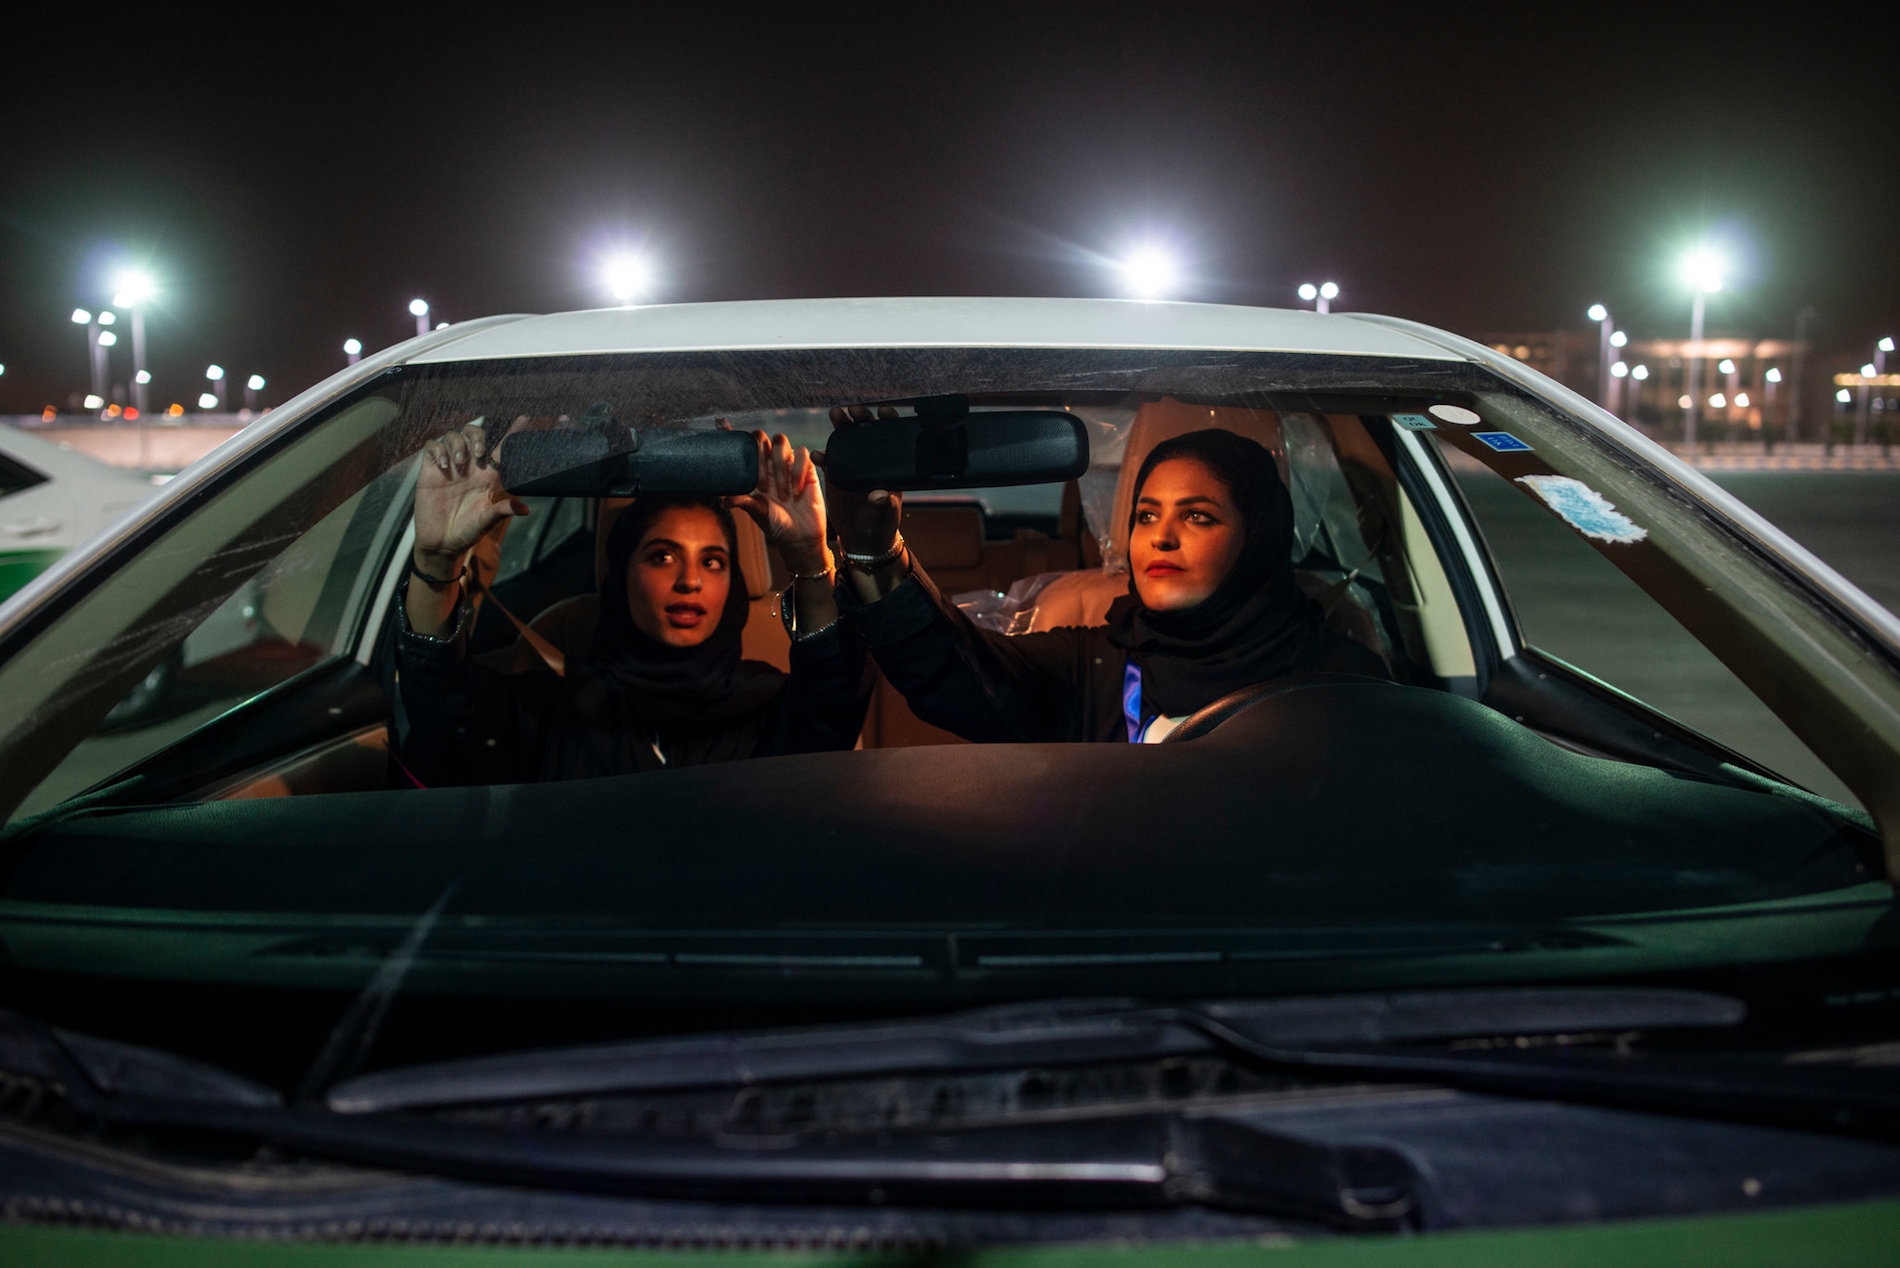 Photo through the front windshield of a car as two Saudi women adjust the mirrors